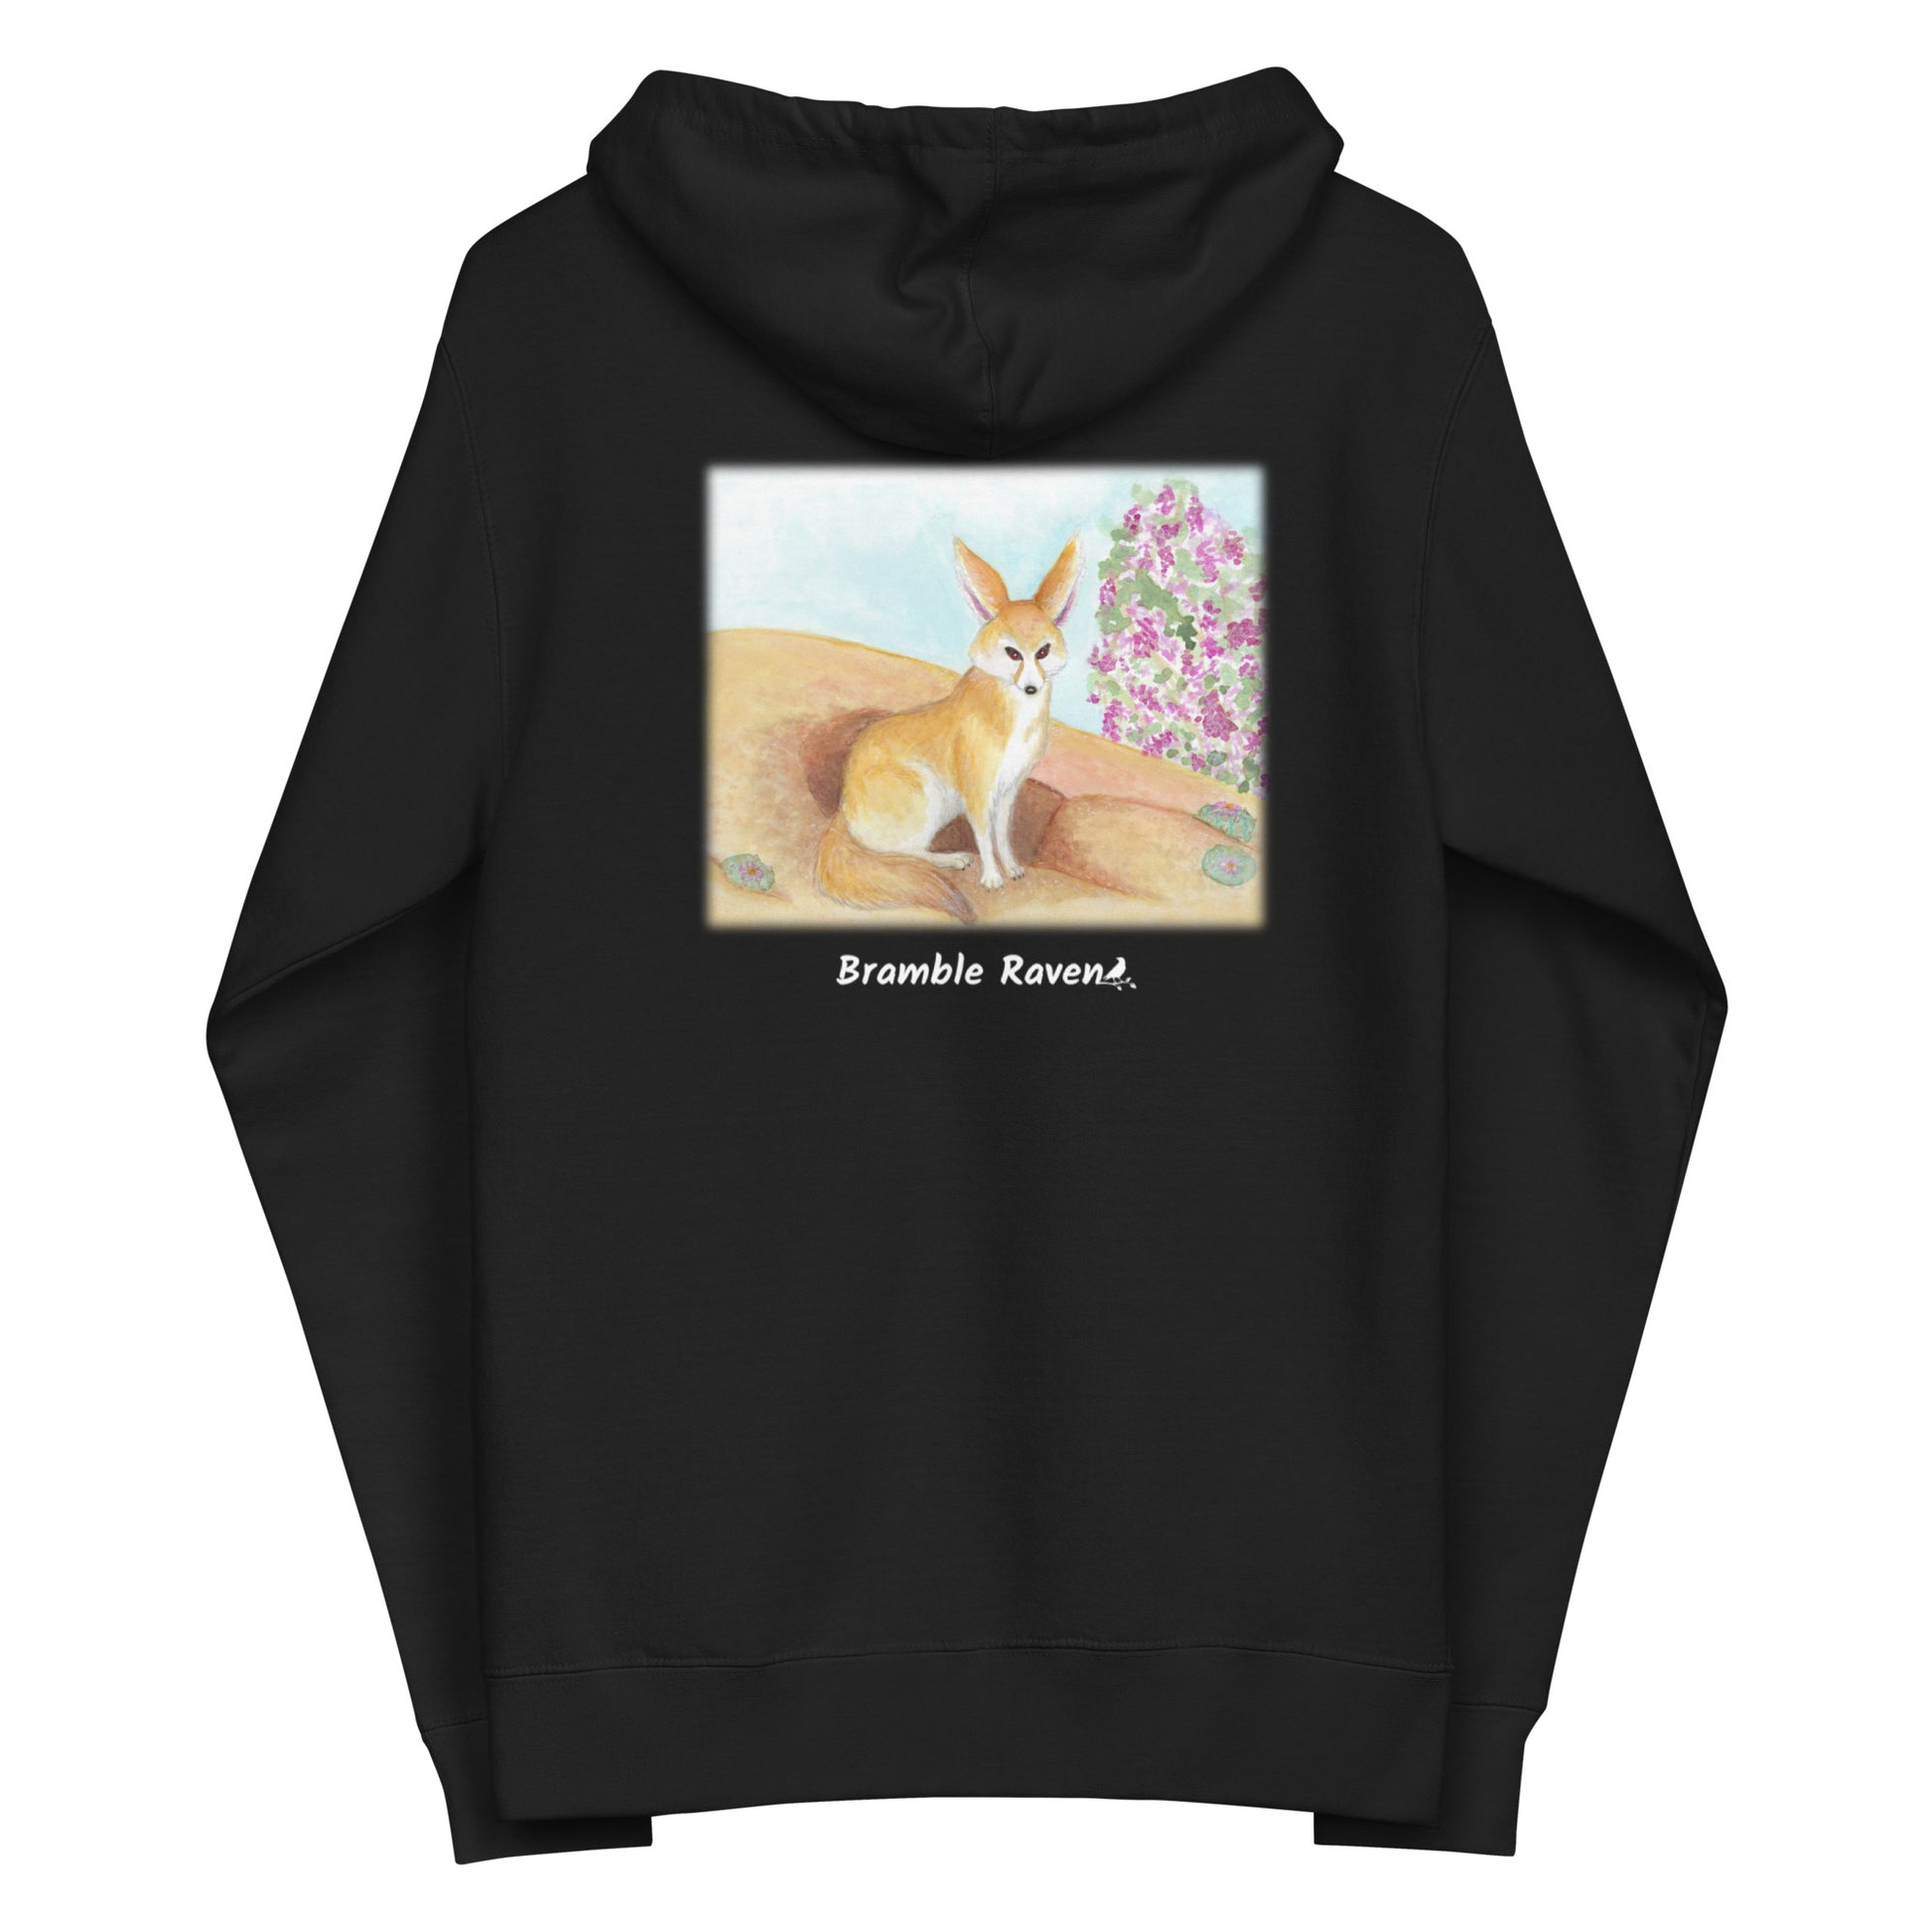 Unisex fleece-lined zip-up black colored hoodie. Features original watercolor painting of a fennec fox in the desert on the back of the hoodie.